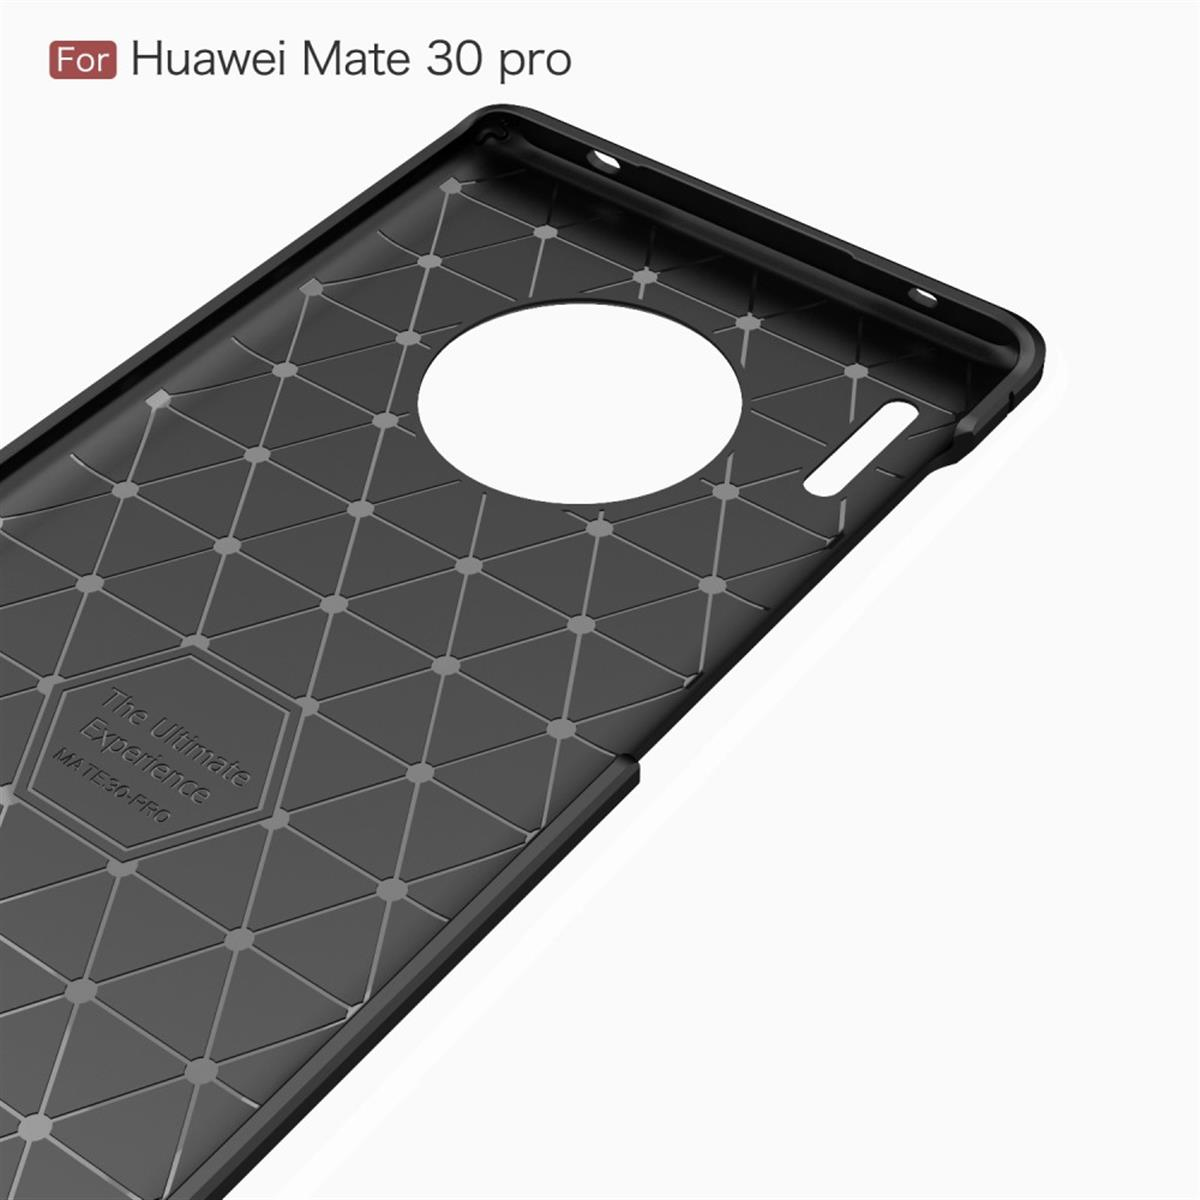 Backcover, Carbon 30 Handycase im Huawei, COVERKINGZ Pro, Mate Look, schwarz